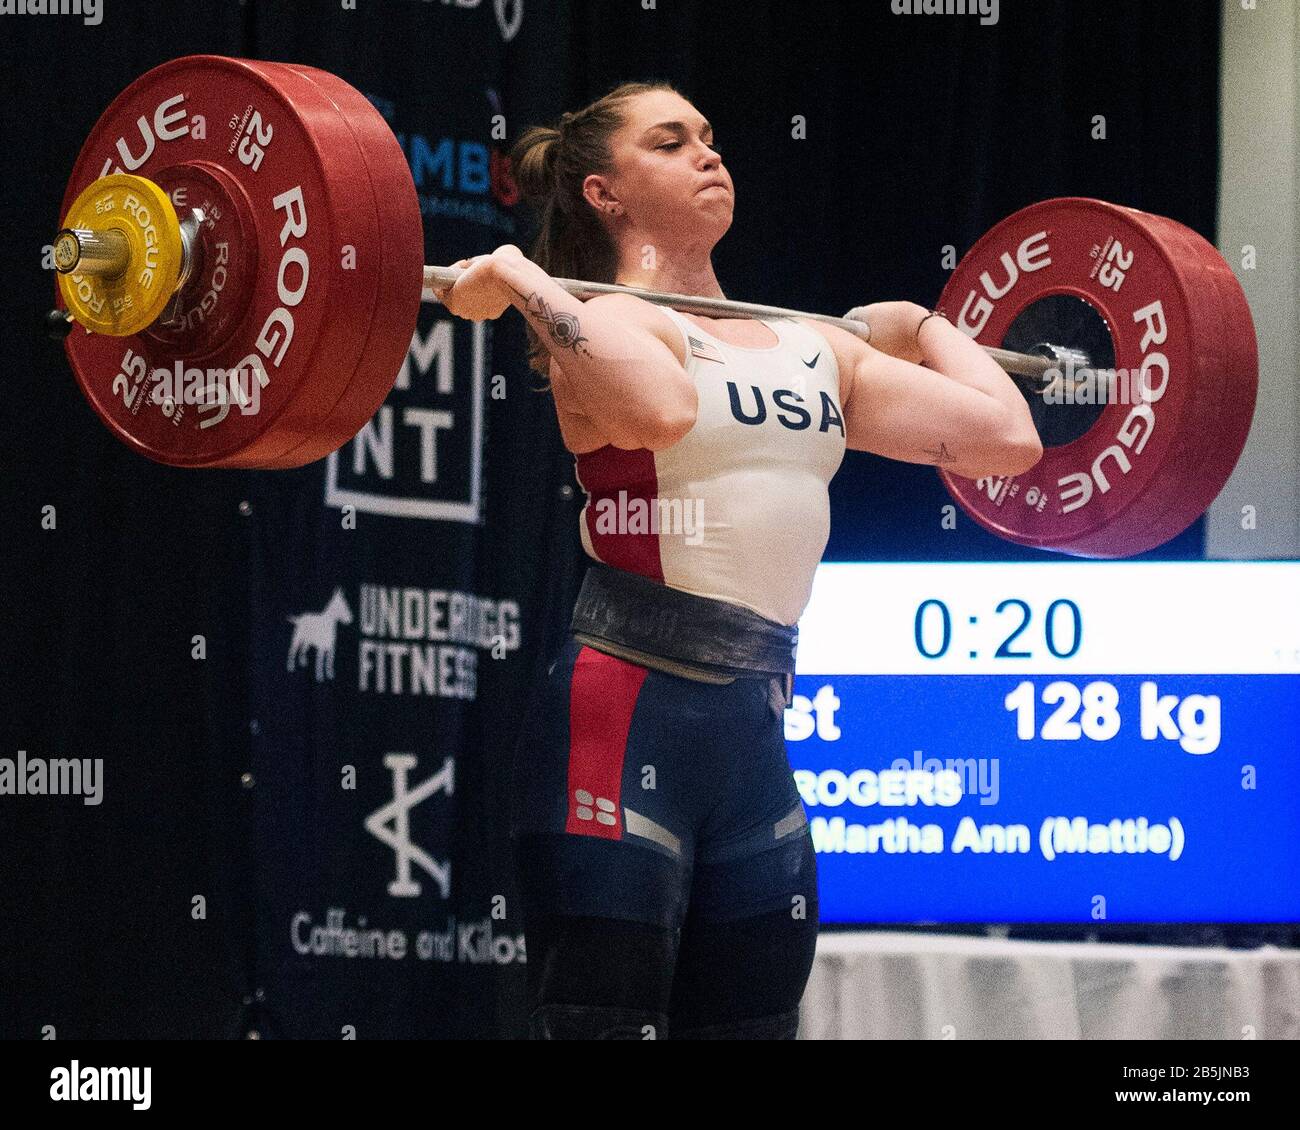 Columbus, Ohio, USA. 8 March, 2020. Mattie Rogers (USA) lifts 128 kgs.in the clean and jerk in the 87kgs. class at the IWF Rogue World Challenge in the Arnold Sports Festival in Columbus, Ohio,  USA. Columbus, Ohio,  USA. Credit: Brent Clark/Alamy Live News Stock Photo